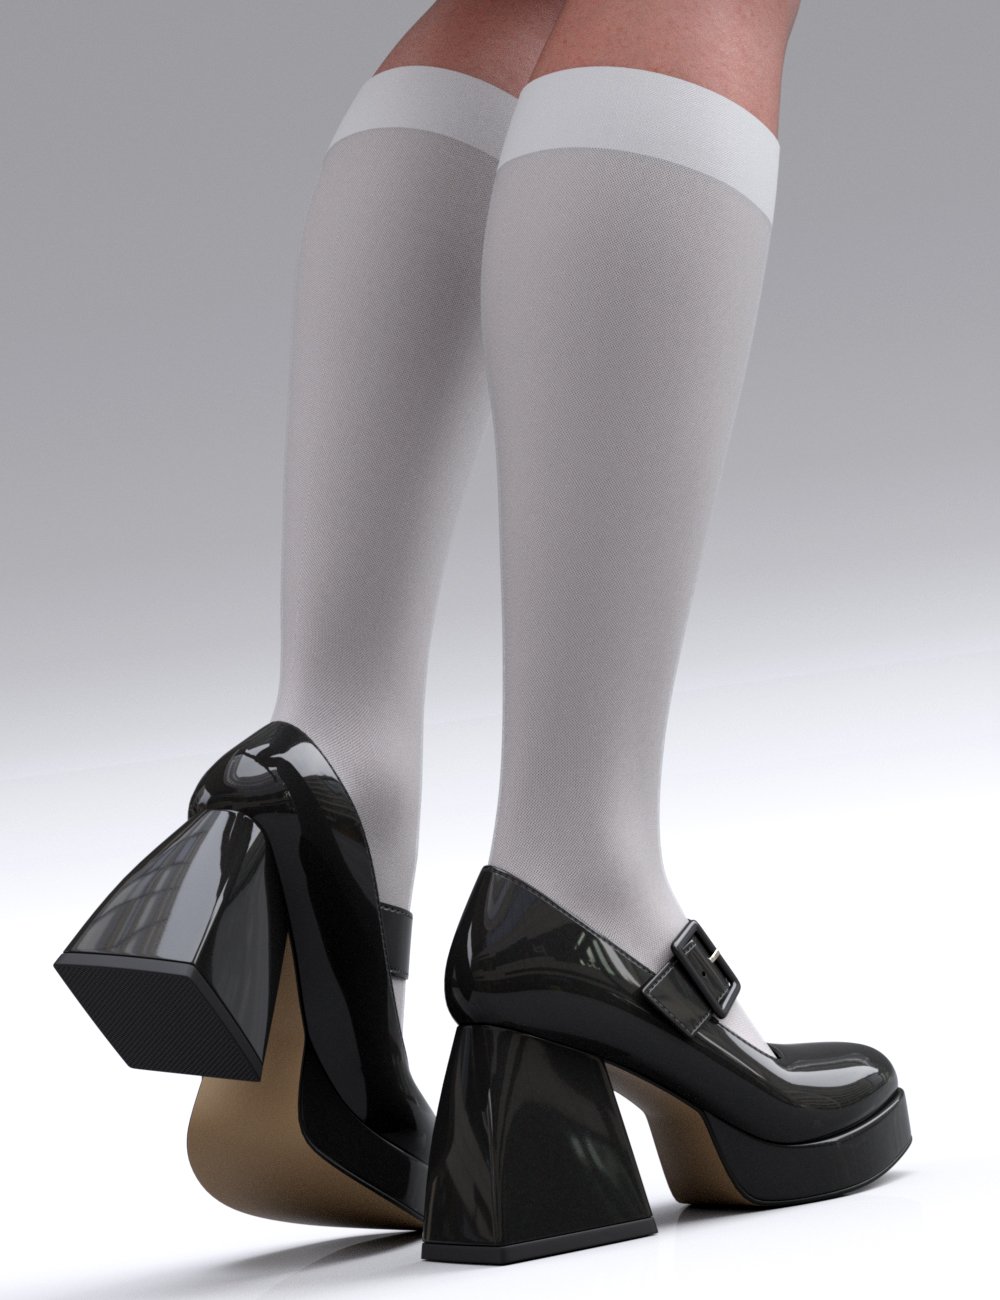 HL Platform Mary Jane Pumps for Genesis 9, 8 and 8.1 Female by: Havanalibere, 3D Models by Daz 3D